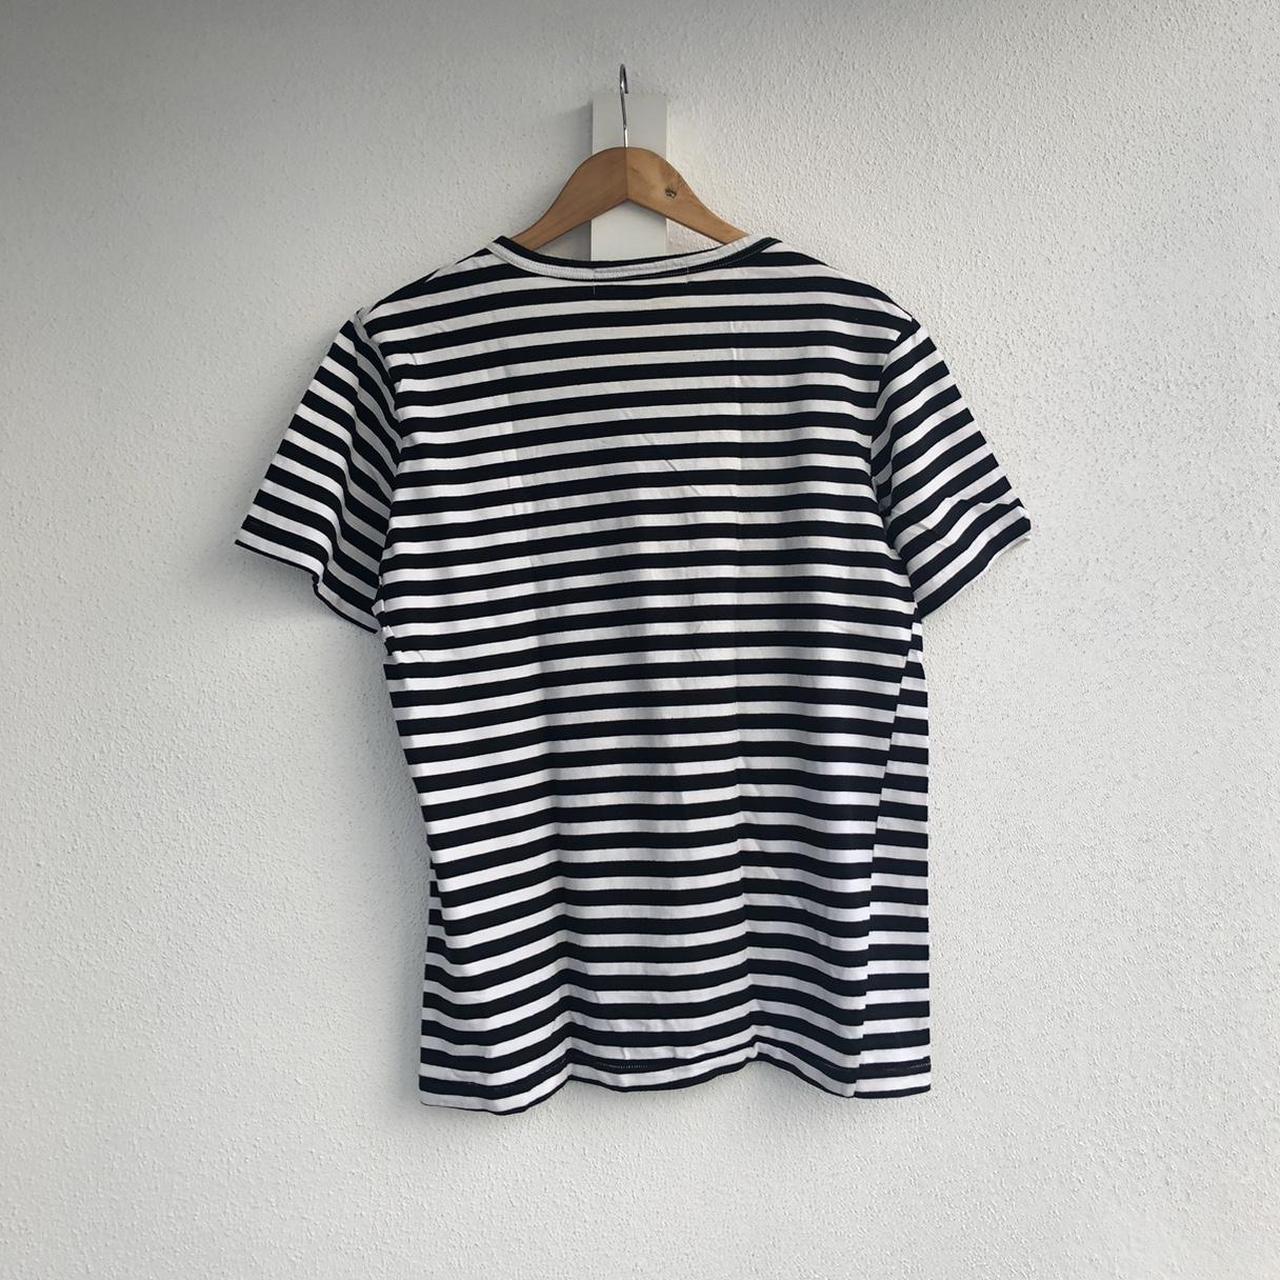 Comme des garcons ‘PLAY’ striped t-shirt Iconic... - Depop